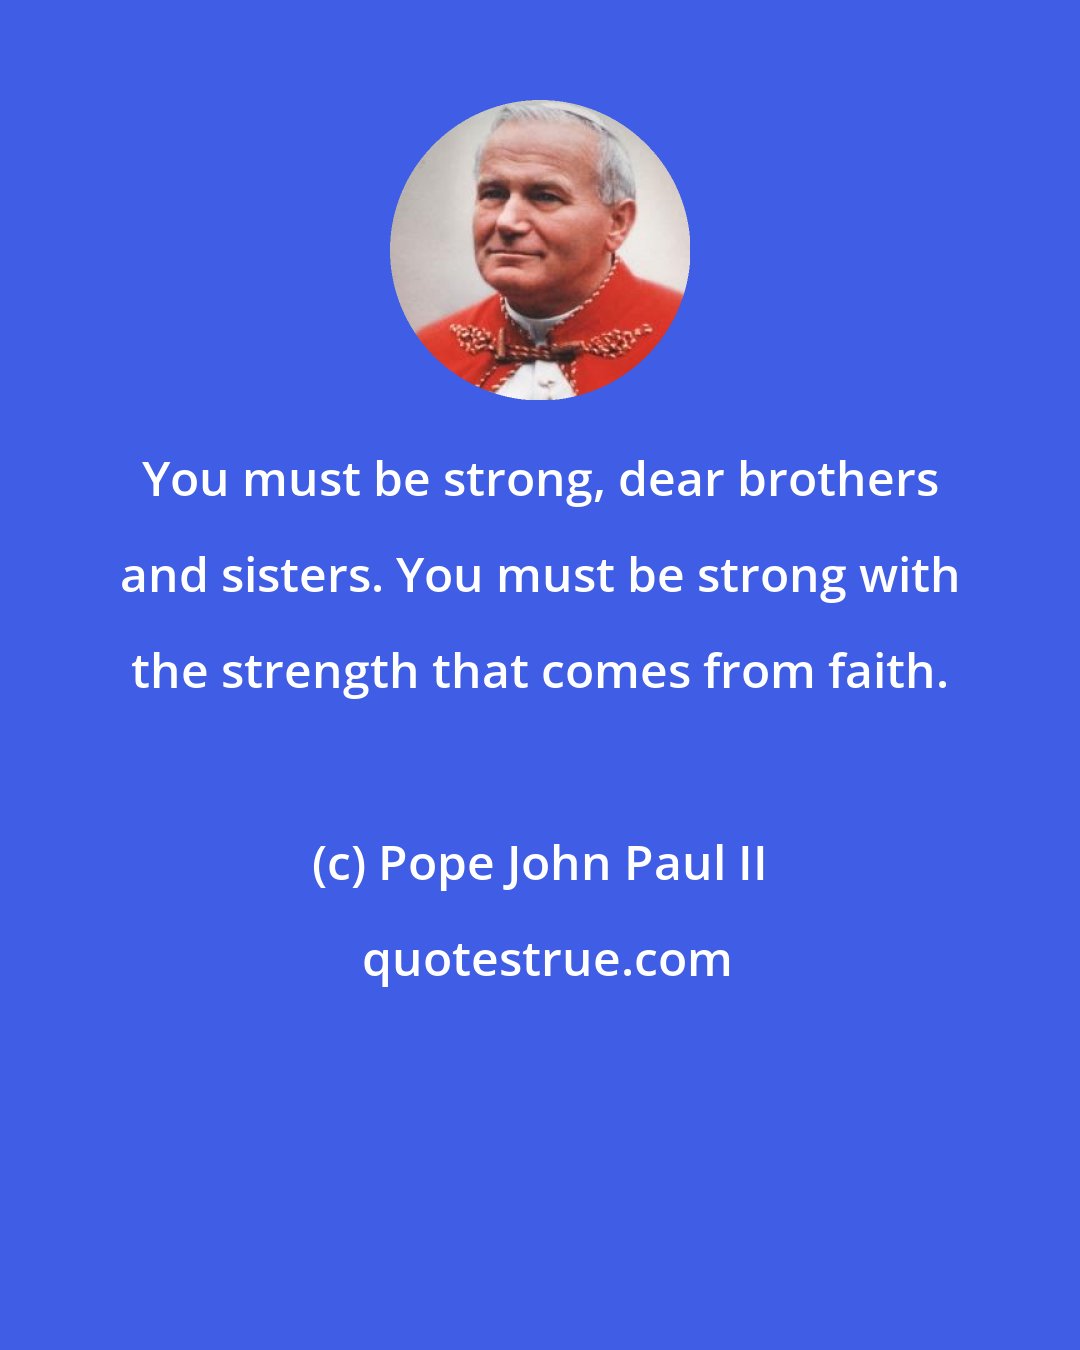 Pope John Paul II: You must be strong, dear brothers and sisters. You must be strong with the strength that comes from faith.